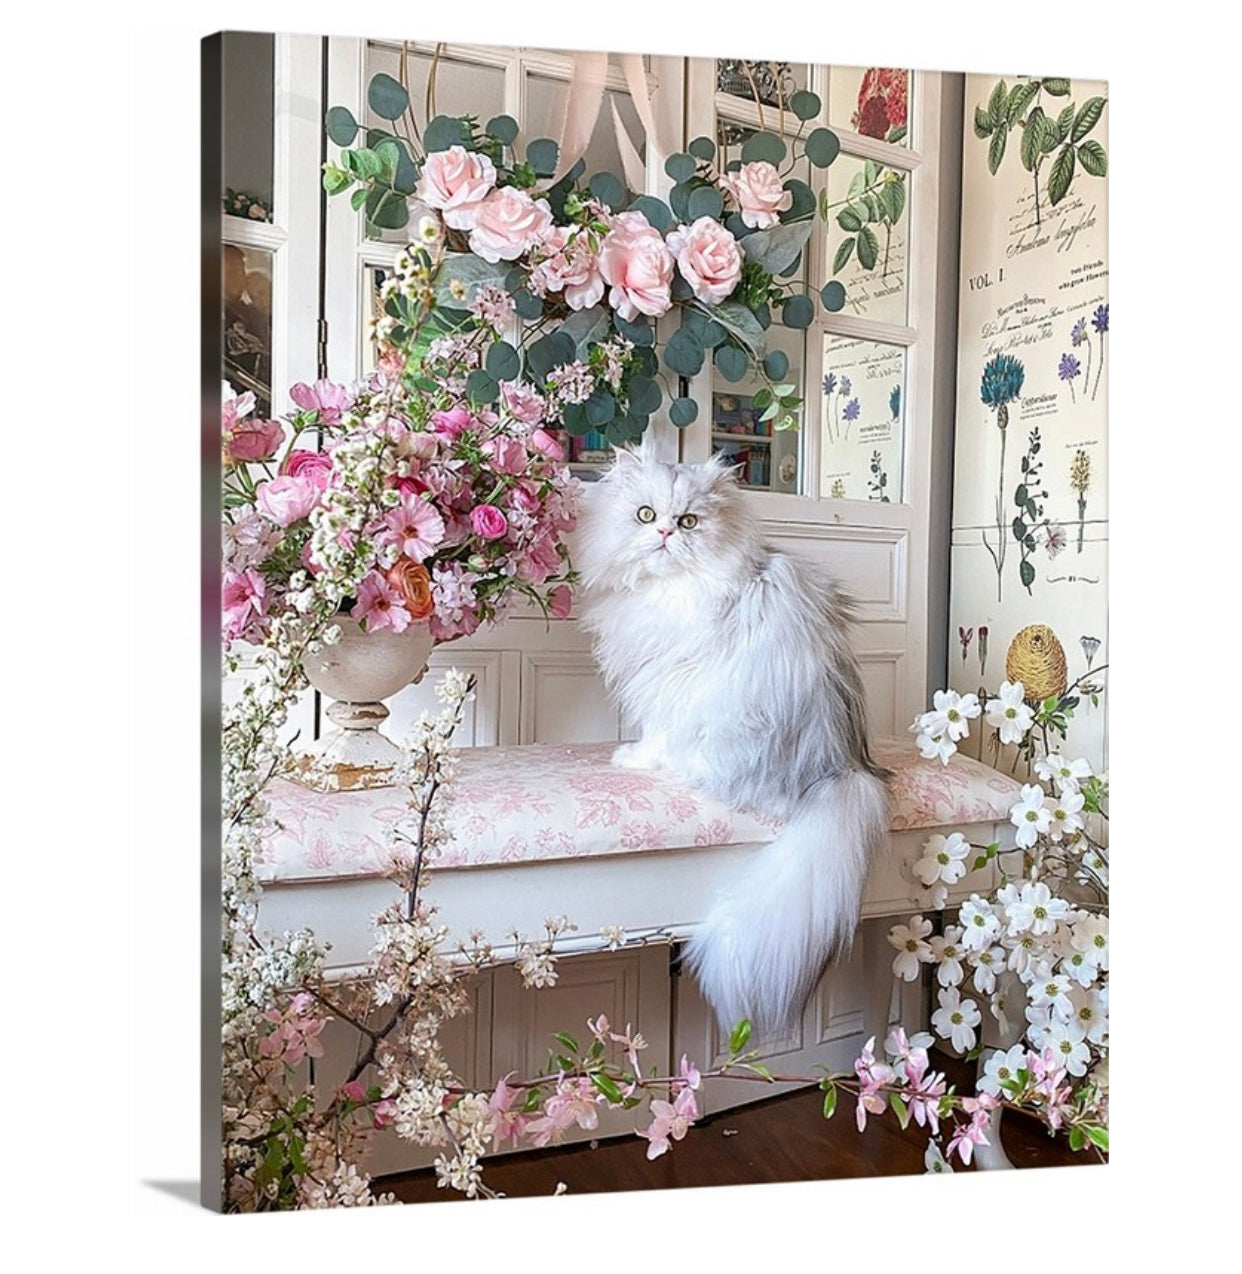 Silver Persian Cat in Flower Gallery Wrapped Canvas